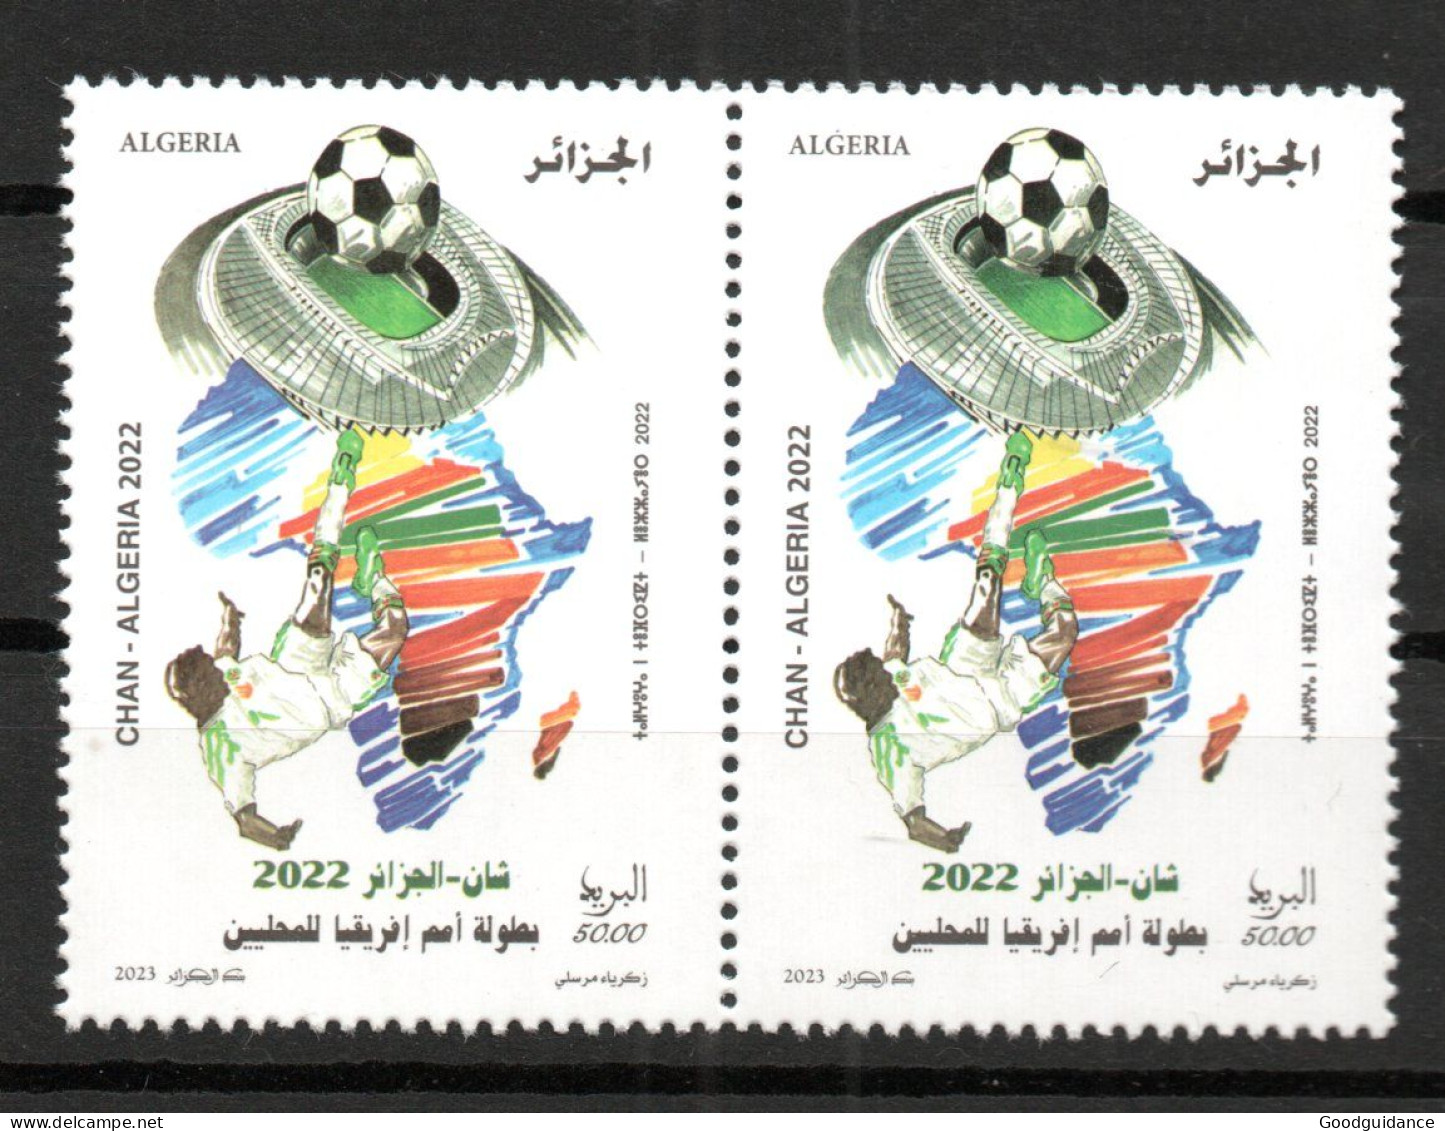 2023 - Algeria - The 7th Africa Cup Of Nations Football Championships 2022- Soccer- Stadium - Map - Pair- Set 1v.MNH** - Coupe D'Afrique Des Nations